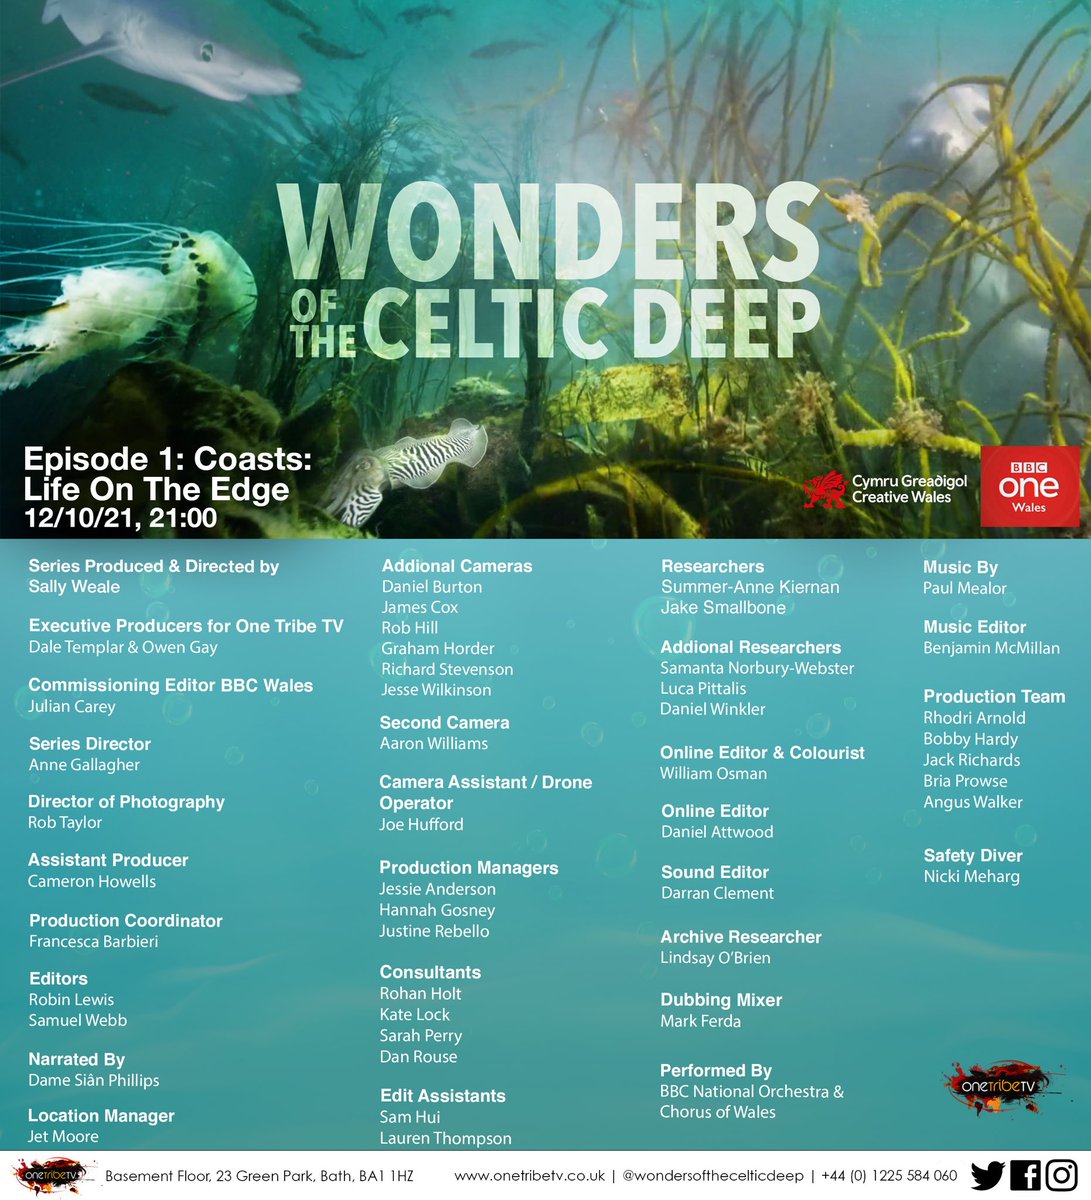 🚨Set your reminders: Wonders of the Celtic Deep - BBC One Wales at 9pm Tuesday 12th October.

🌊🐙🦞🦀🐠🐟🐬🐋🦈🦭

Don’t miss it - Dive in!  🤿

#WondersOfTheCelticDeep #WelshWaters #MarineLife #Wales #CardiganBay #MarineConservation #CBMWC